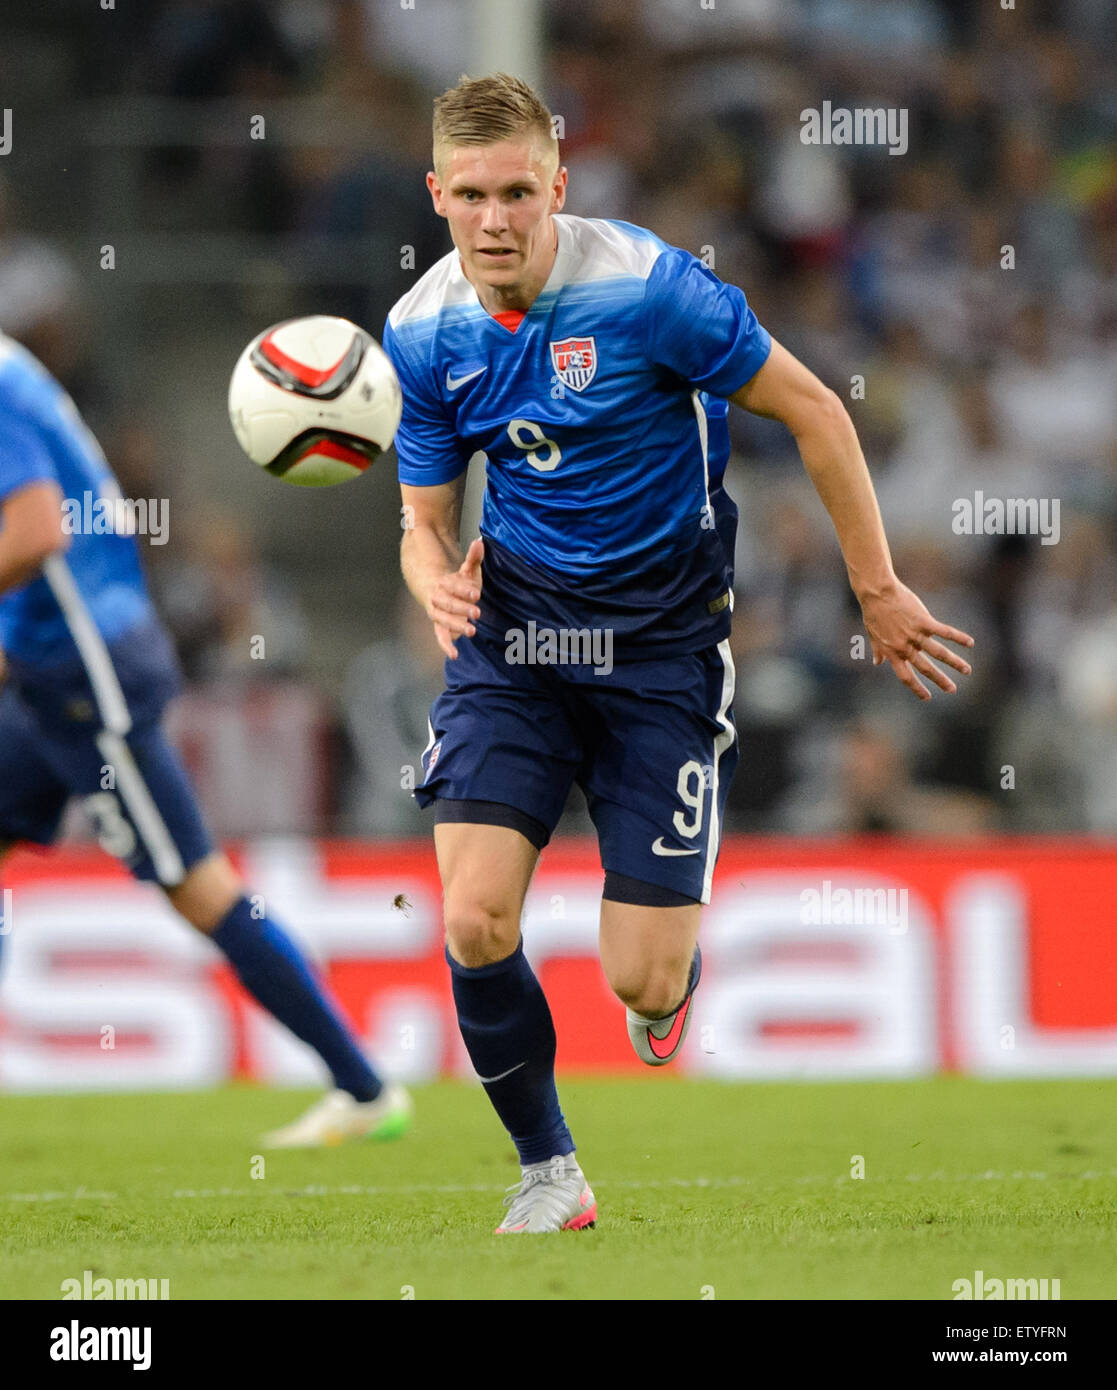 Cologne, Germany. 10th June, 2015. Aron Johannsson of the USA in action during the international friendly soccer match between Germany and the USA at RheinEnergieStadion in Cologne, Germany, 10 June 2015. The USA won the match 2-1. Photo: Thomas Eisenhuth/dpa - NO WIRE SERVICE -/dpa/Alamy Live News Stock Photo